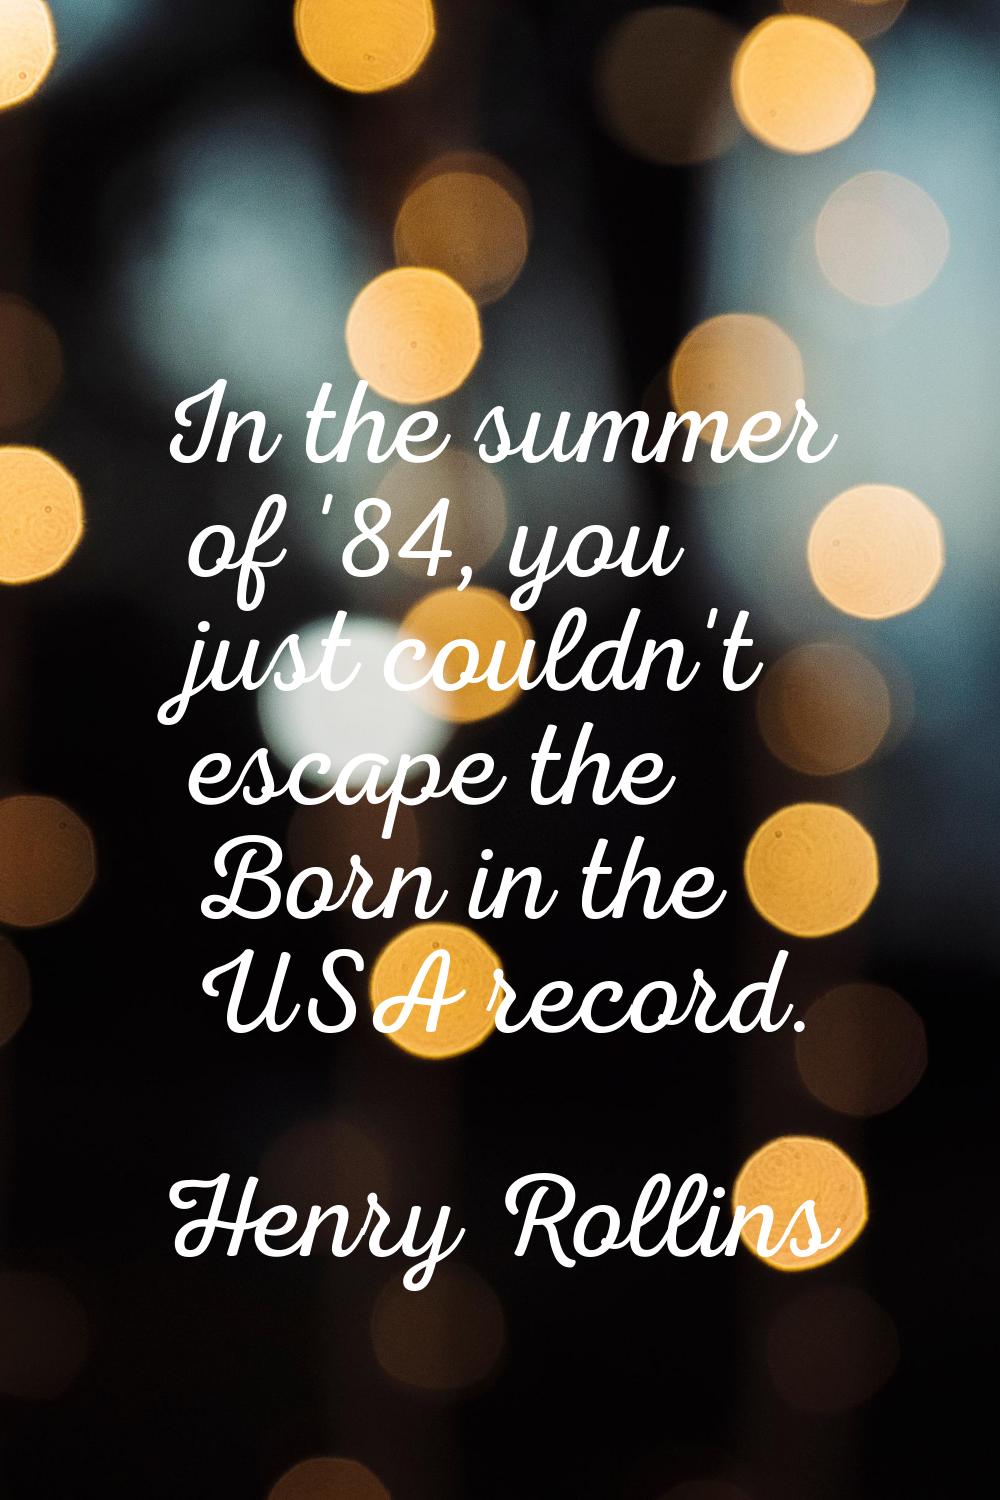 In the summer of '84, you just couldn't escape the Born in the USA record.